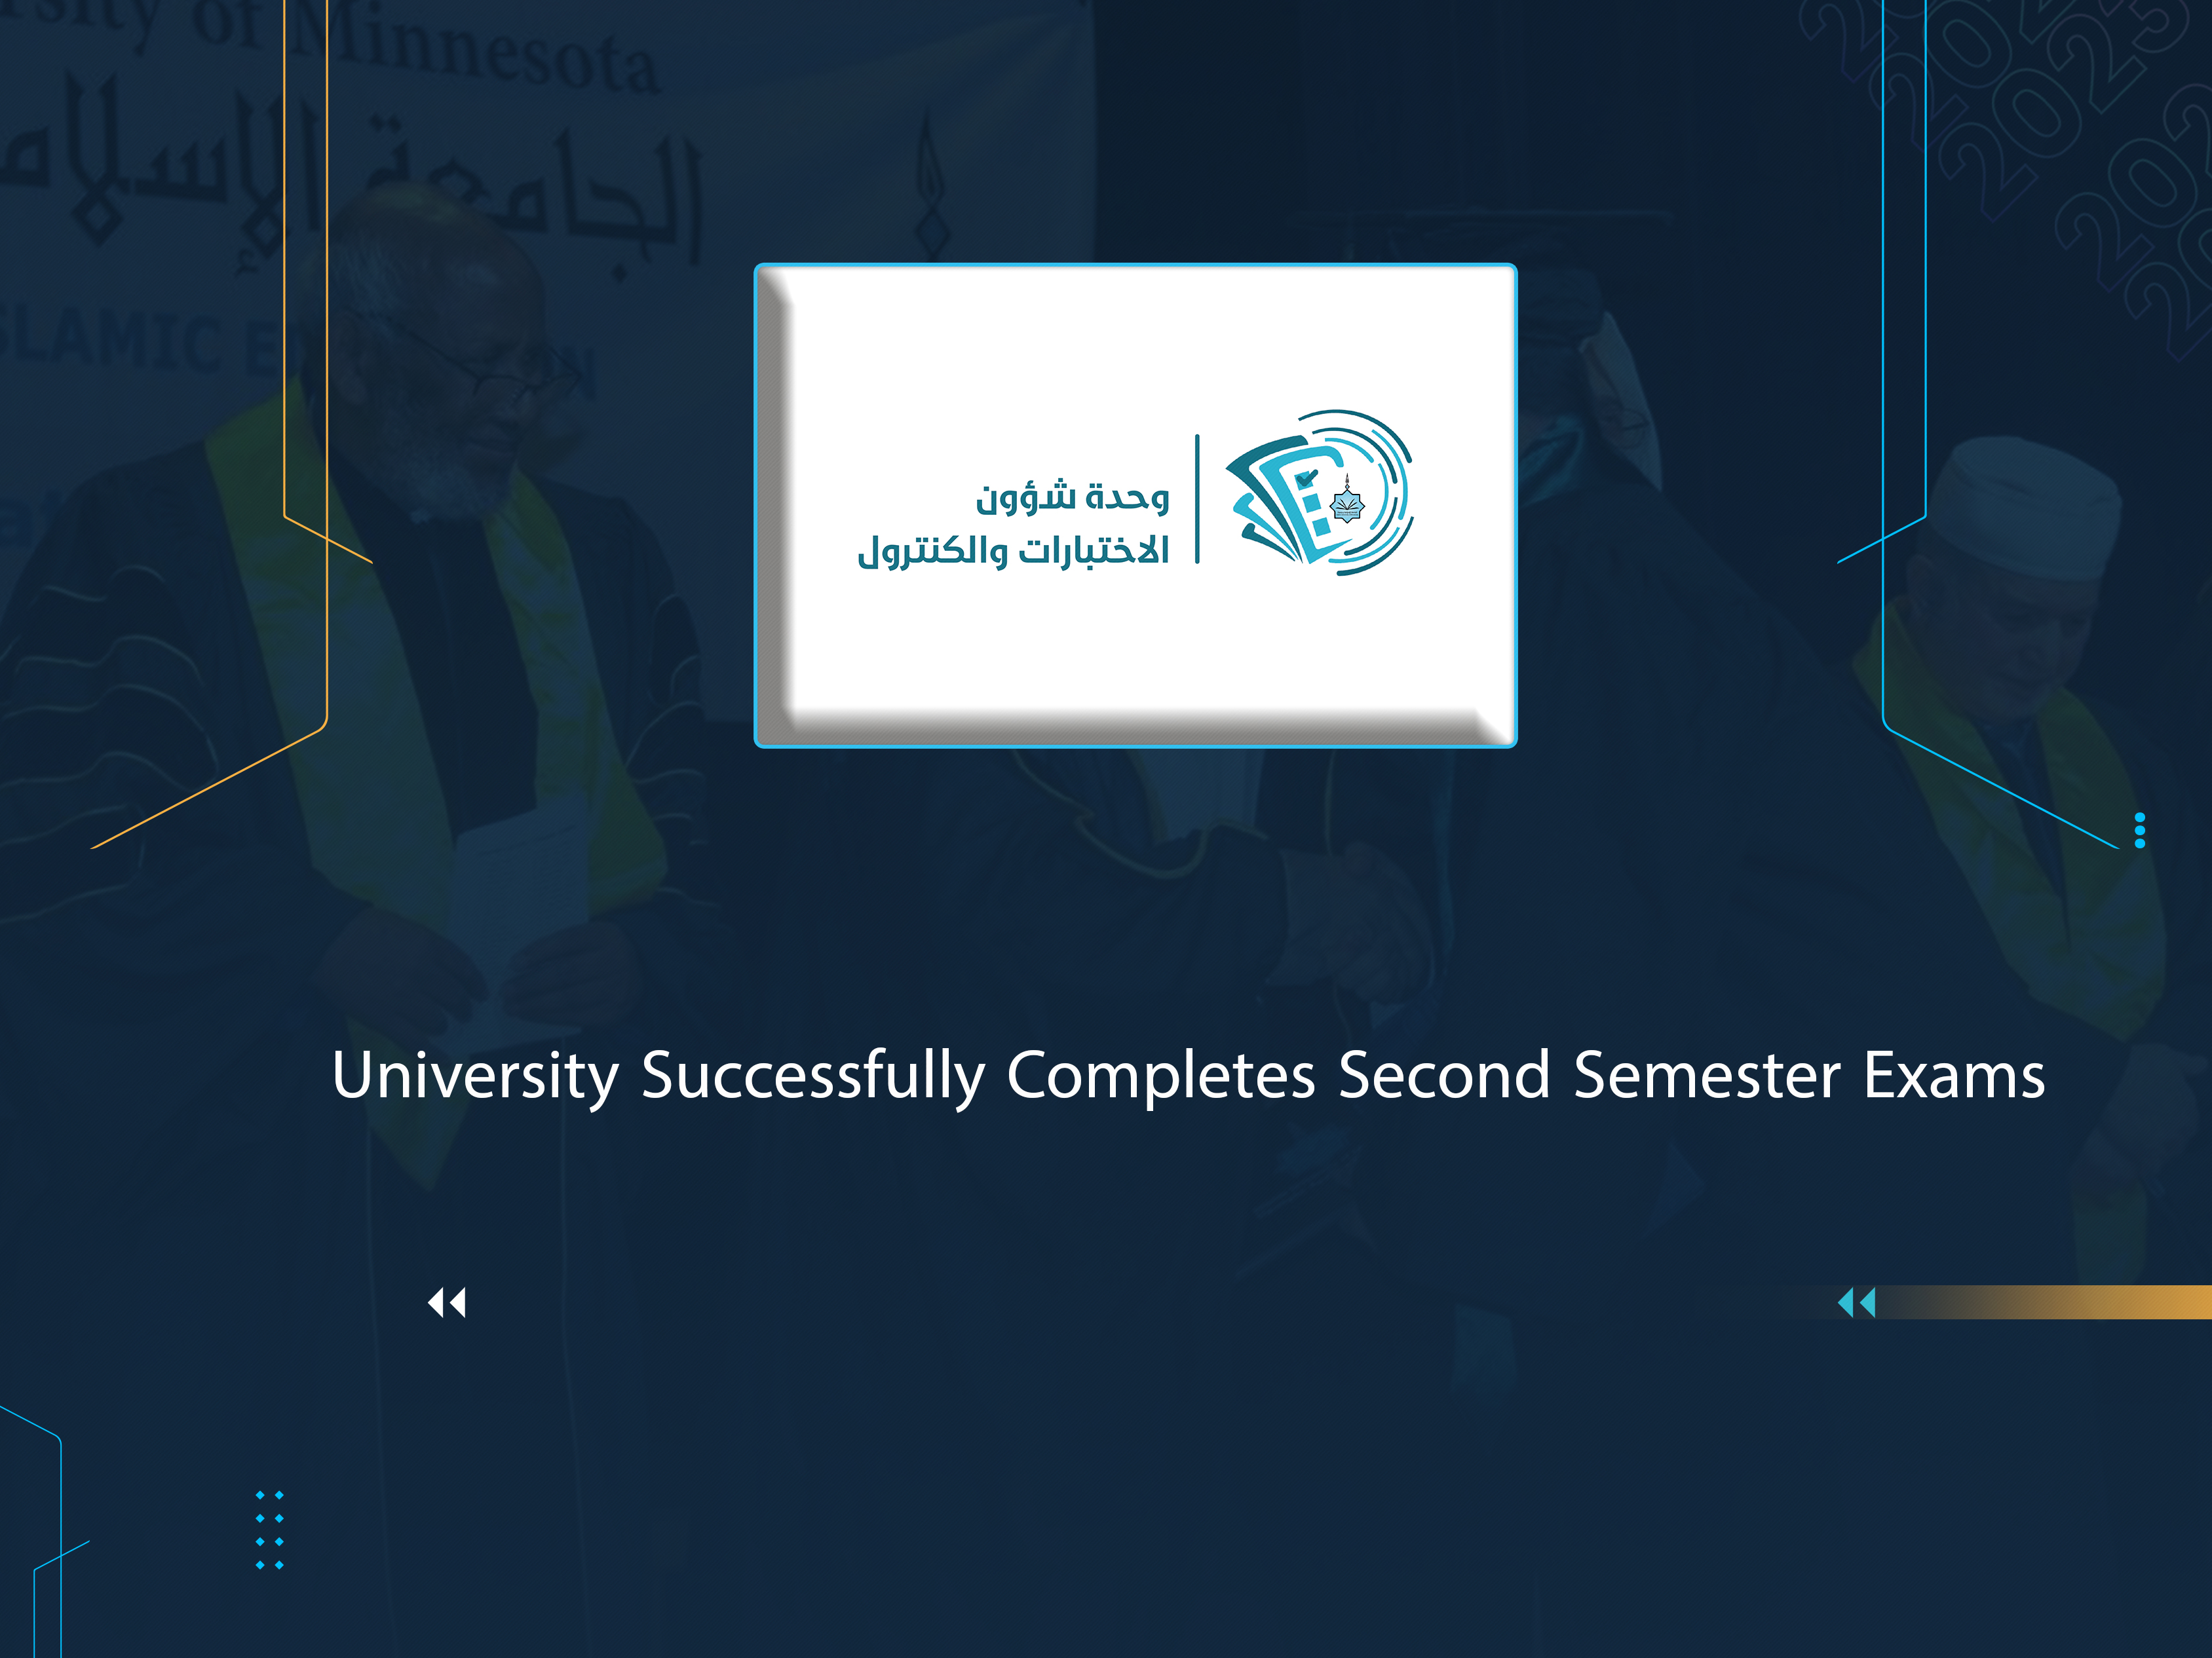 University Successfully Completes Second Semester Exams